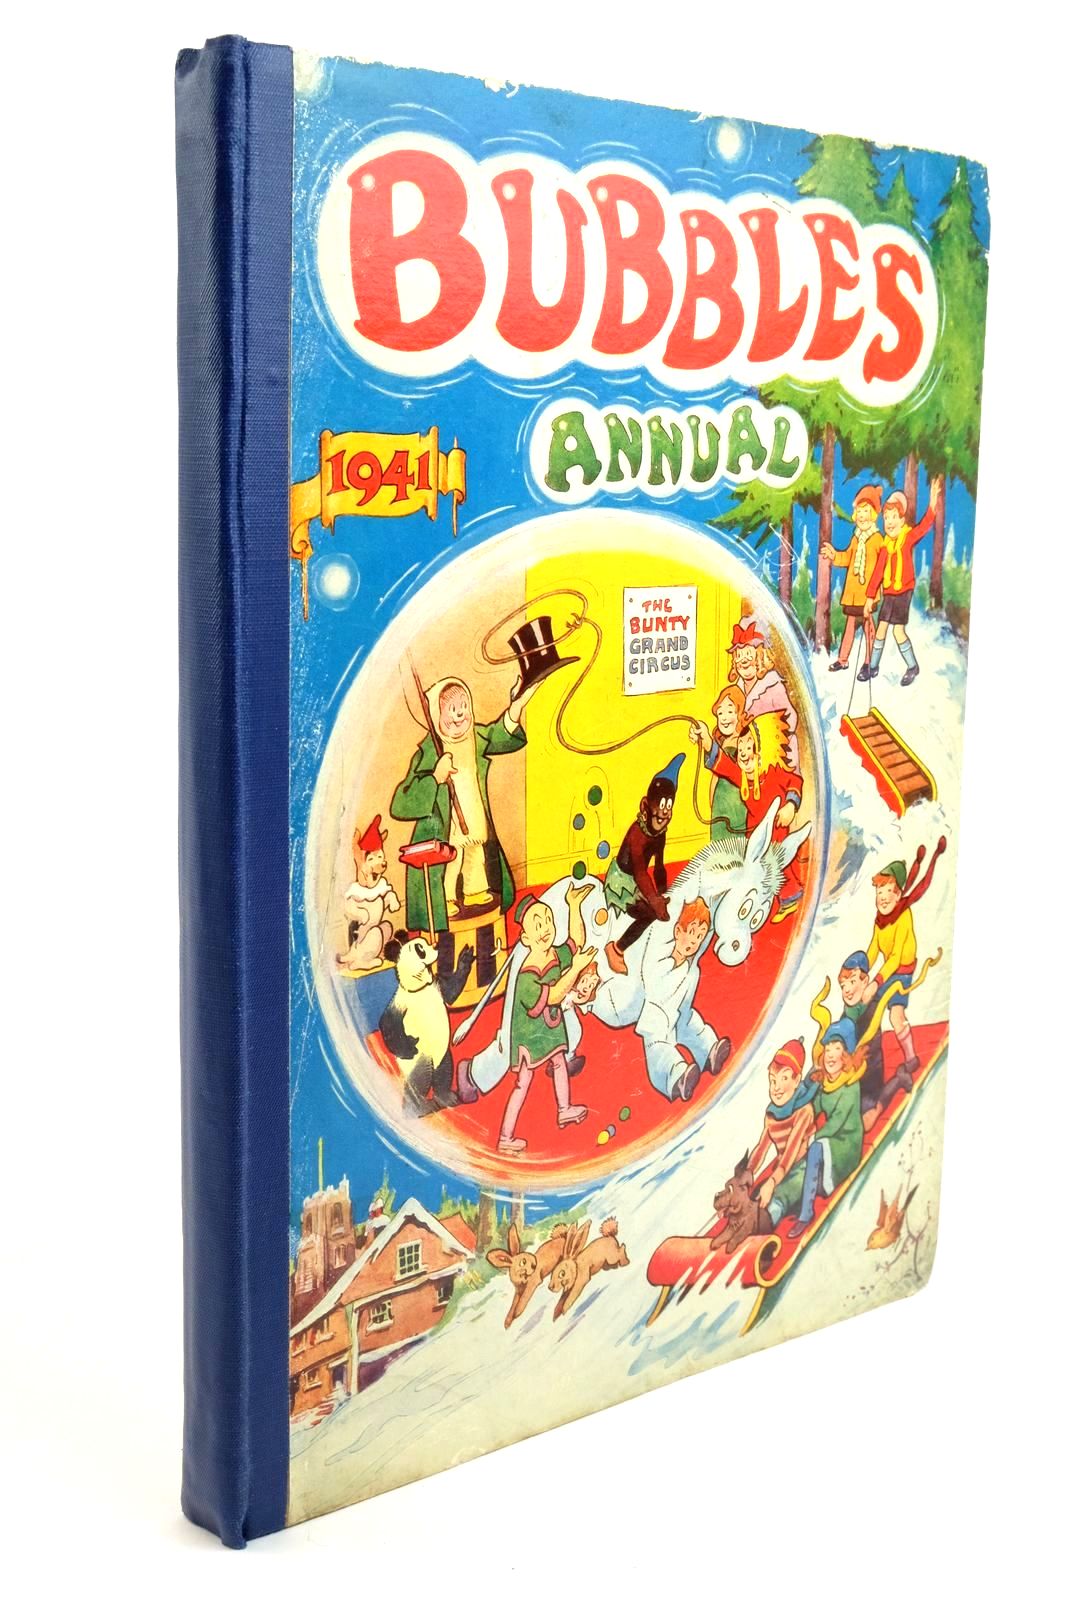 Photo of BUBBLES ANNUAL 1941 published by The Amalgamated Press (STOCK CODE: 1322064)  for sale by Stella & Rose's Books